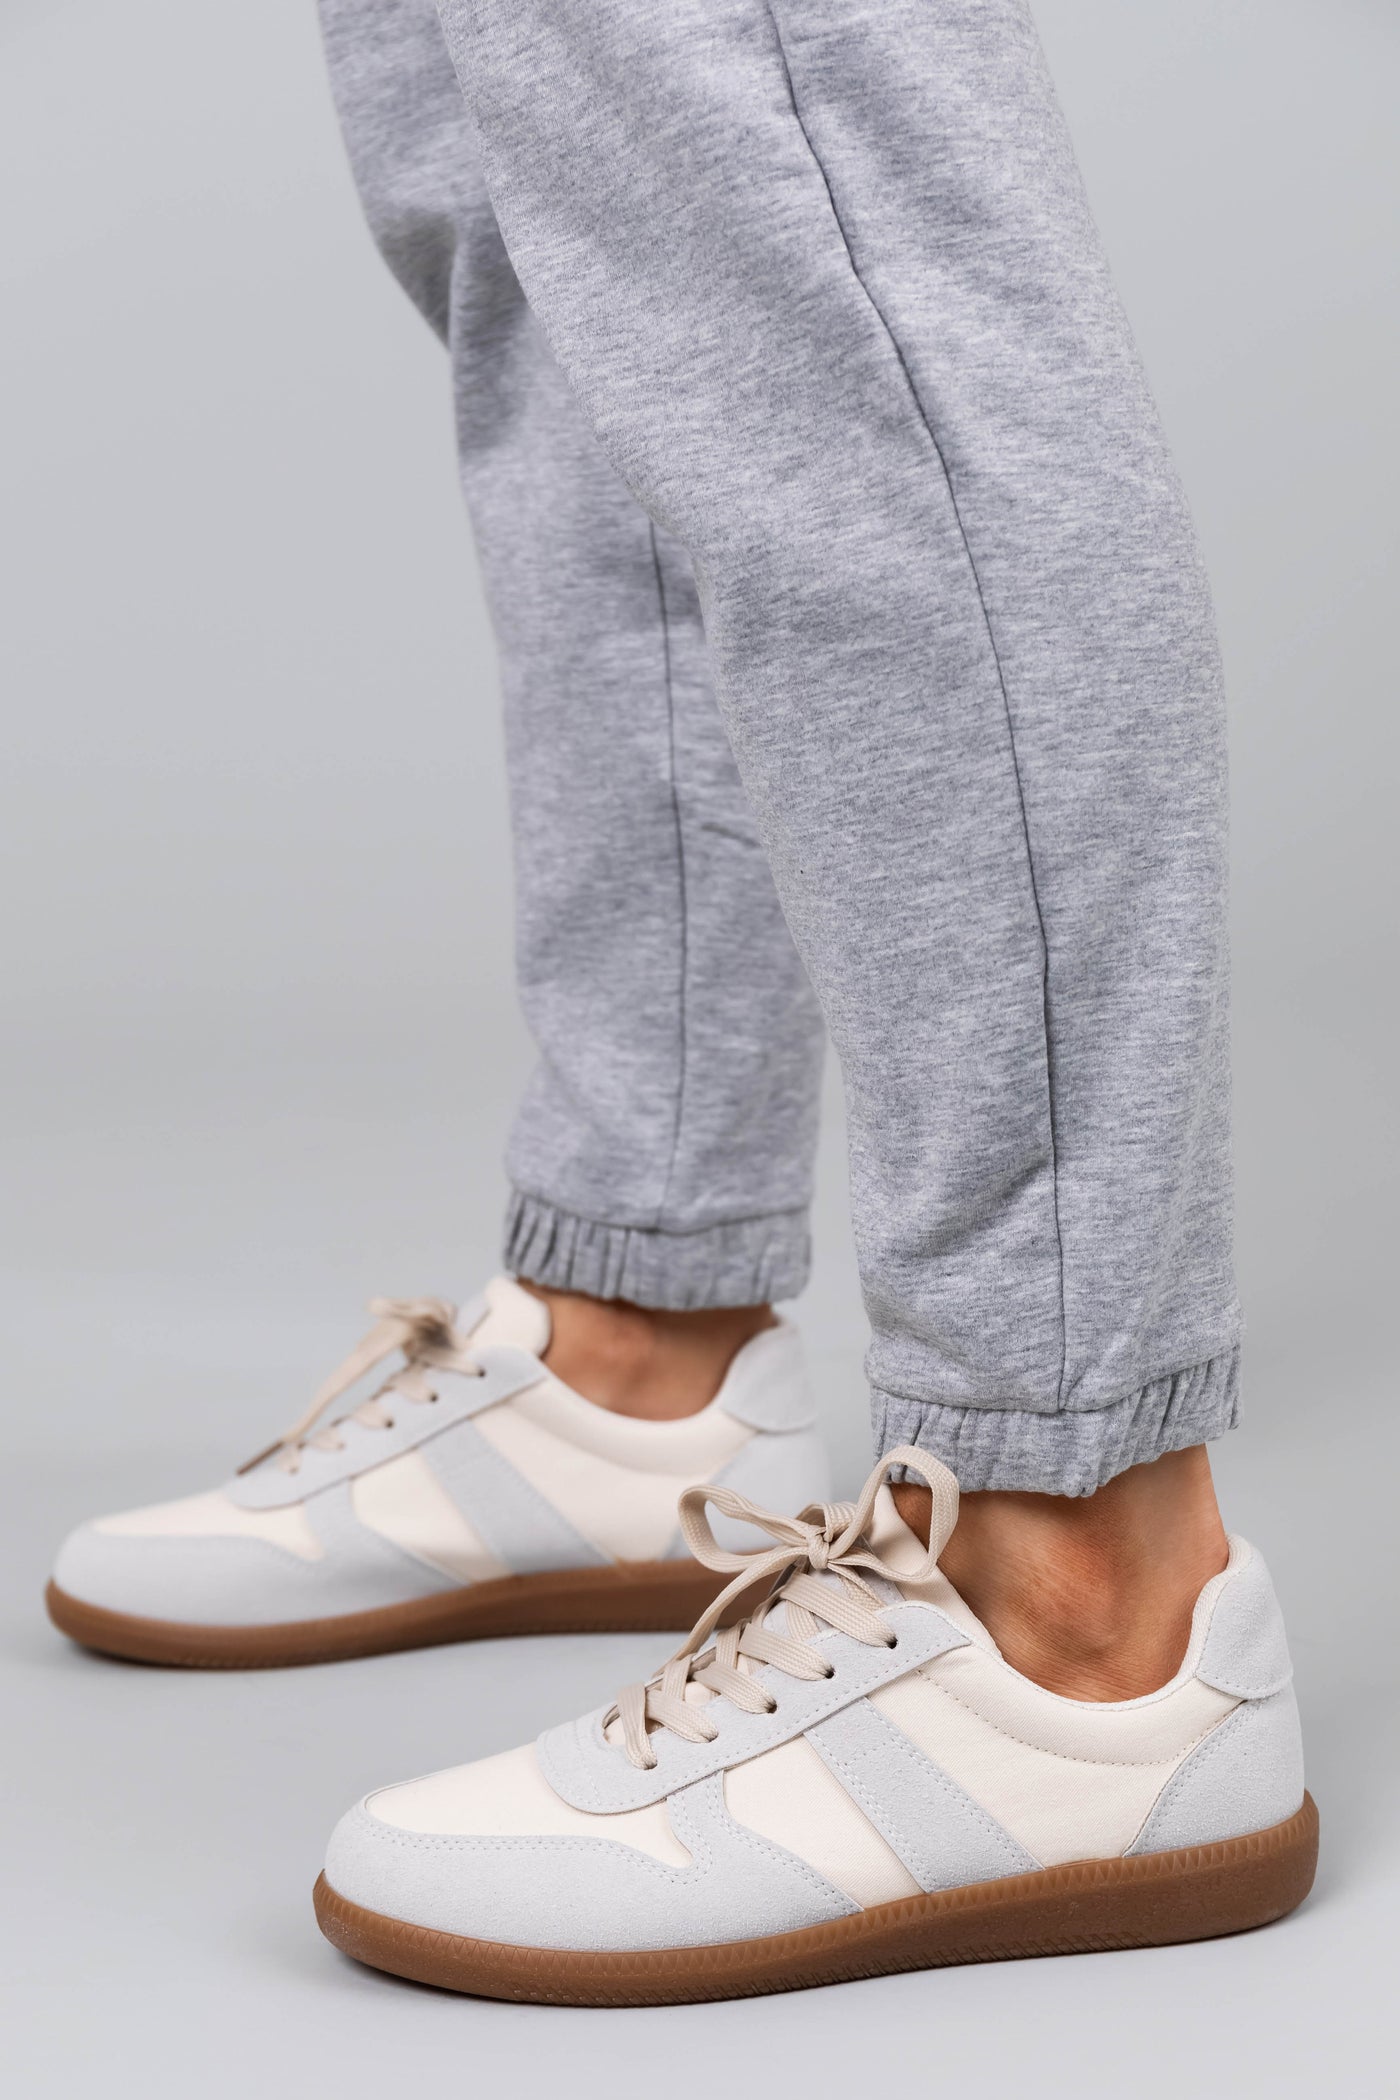 Pastel Blue and Cream Colorblock Lace Up Sneakers